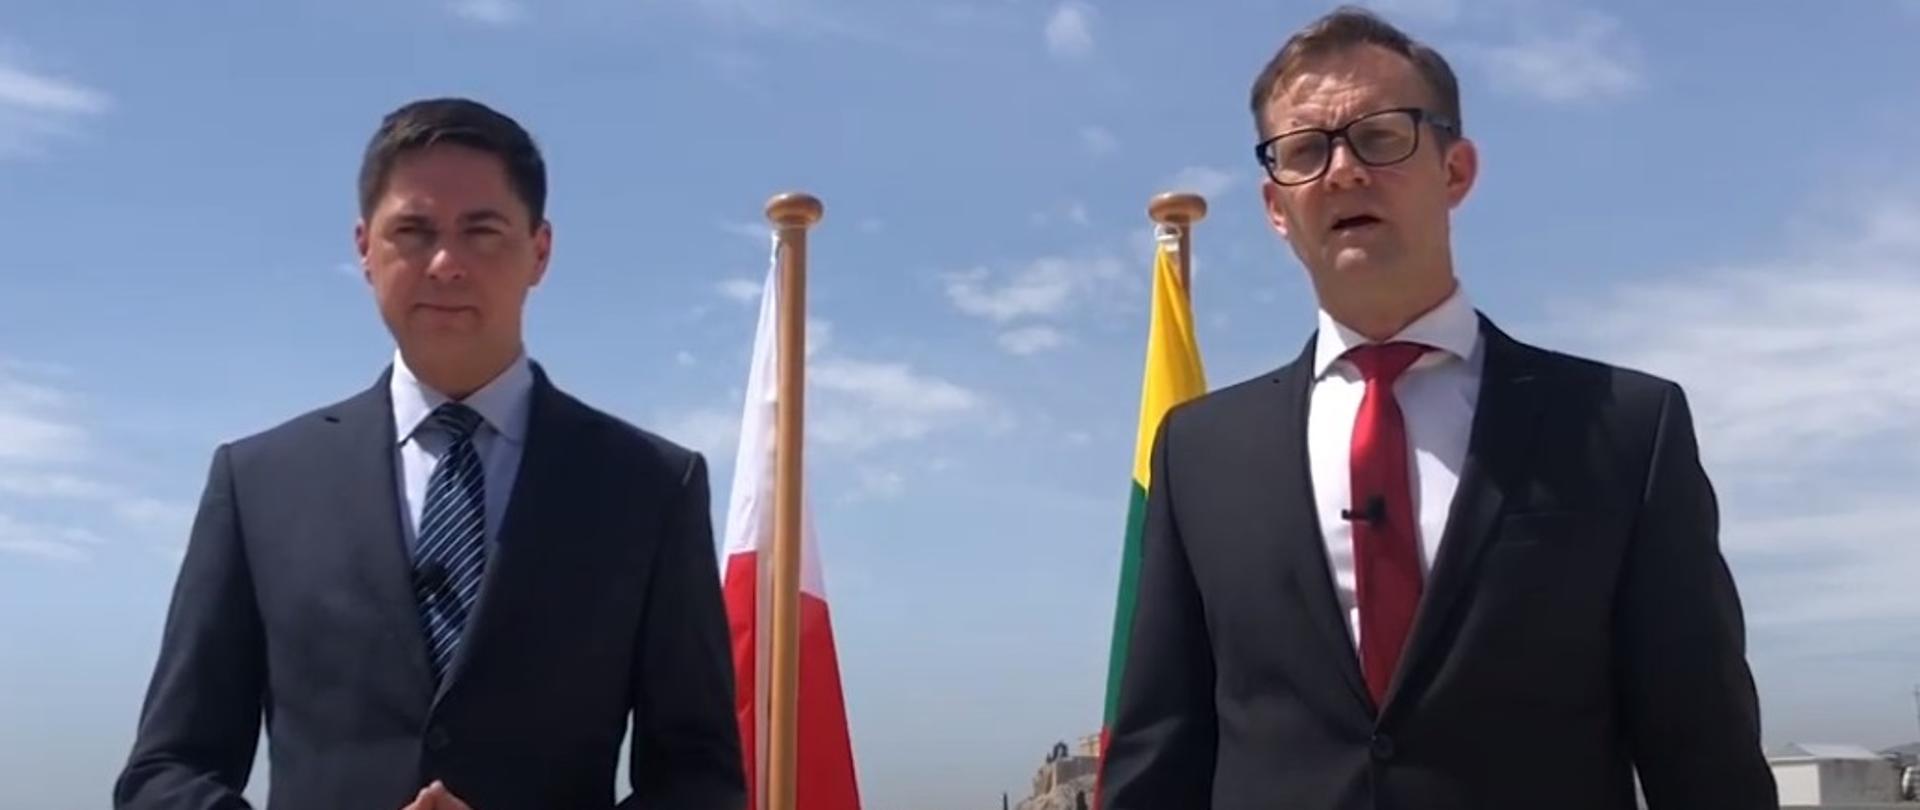 message of the Ambassadors of Poland and Lithuania